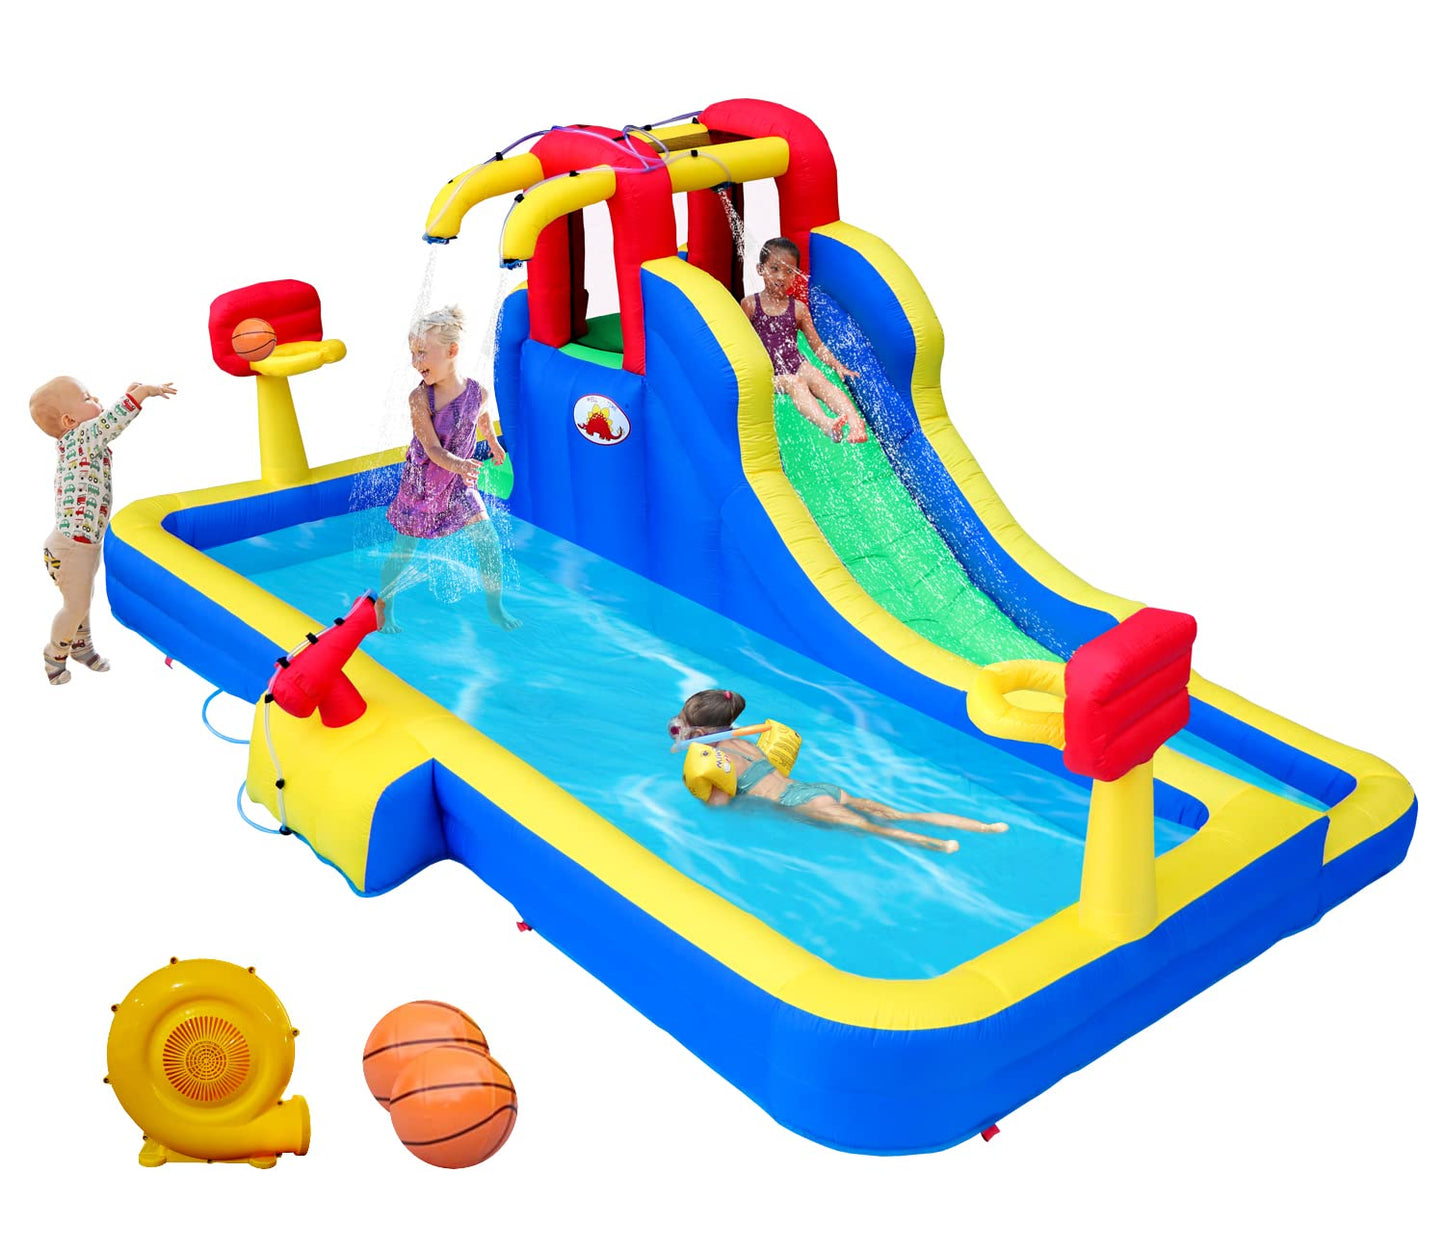 WELLFUNTIME Inflatable Water Park with Blower, Slide with Water Cannon and Double Basketball Rings